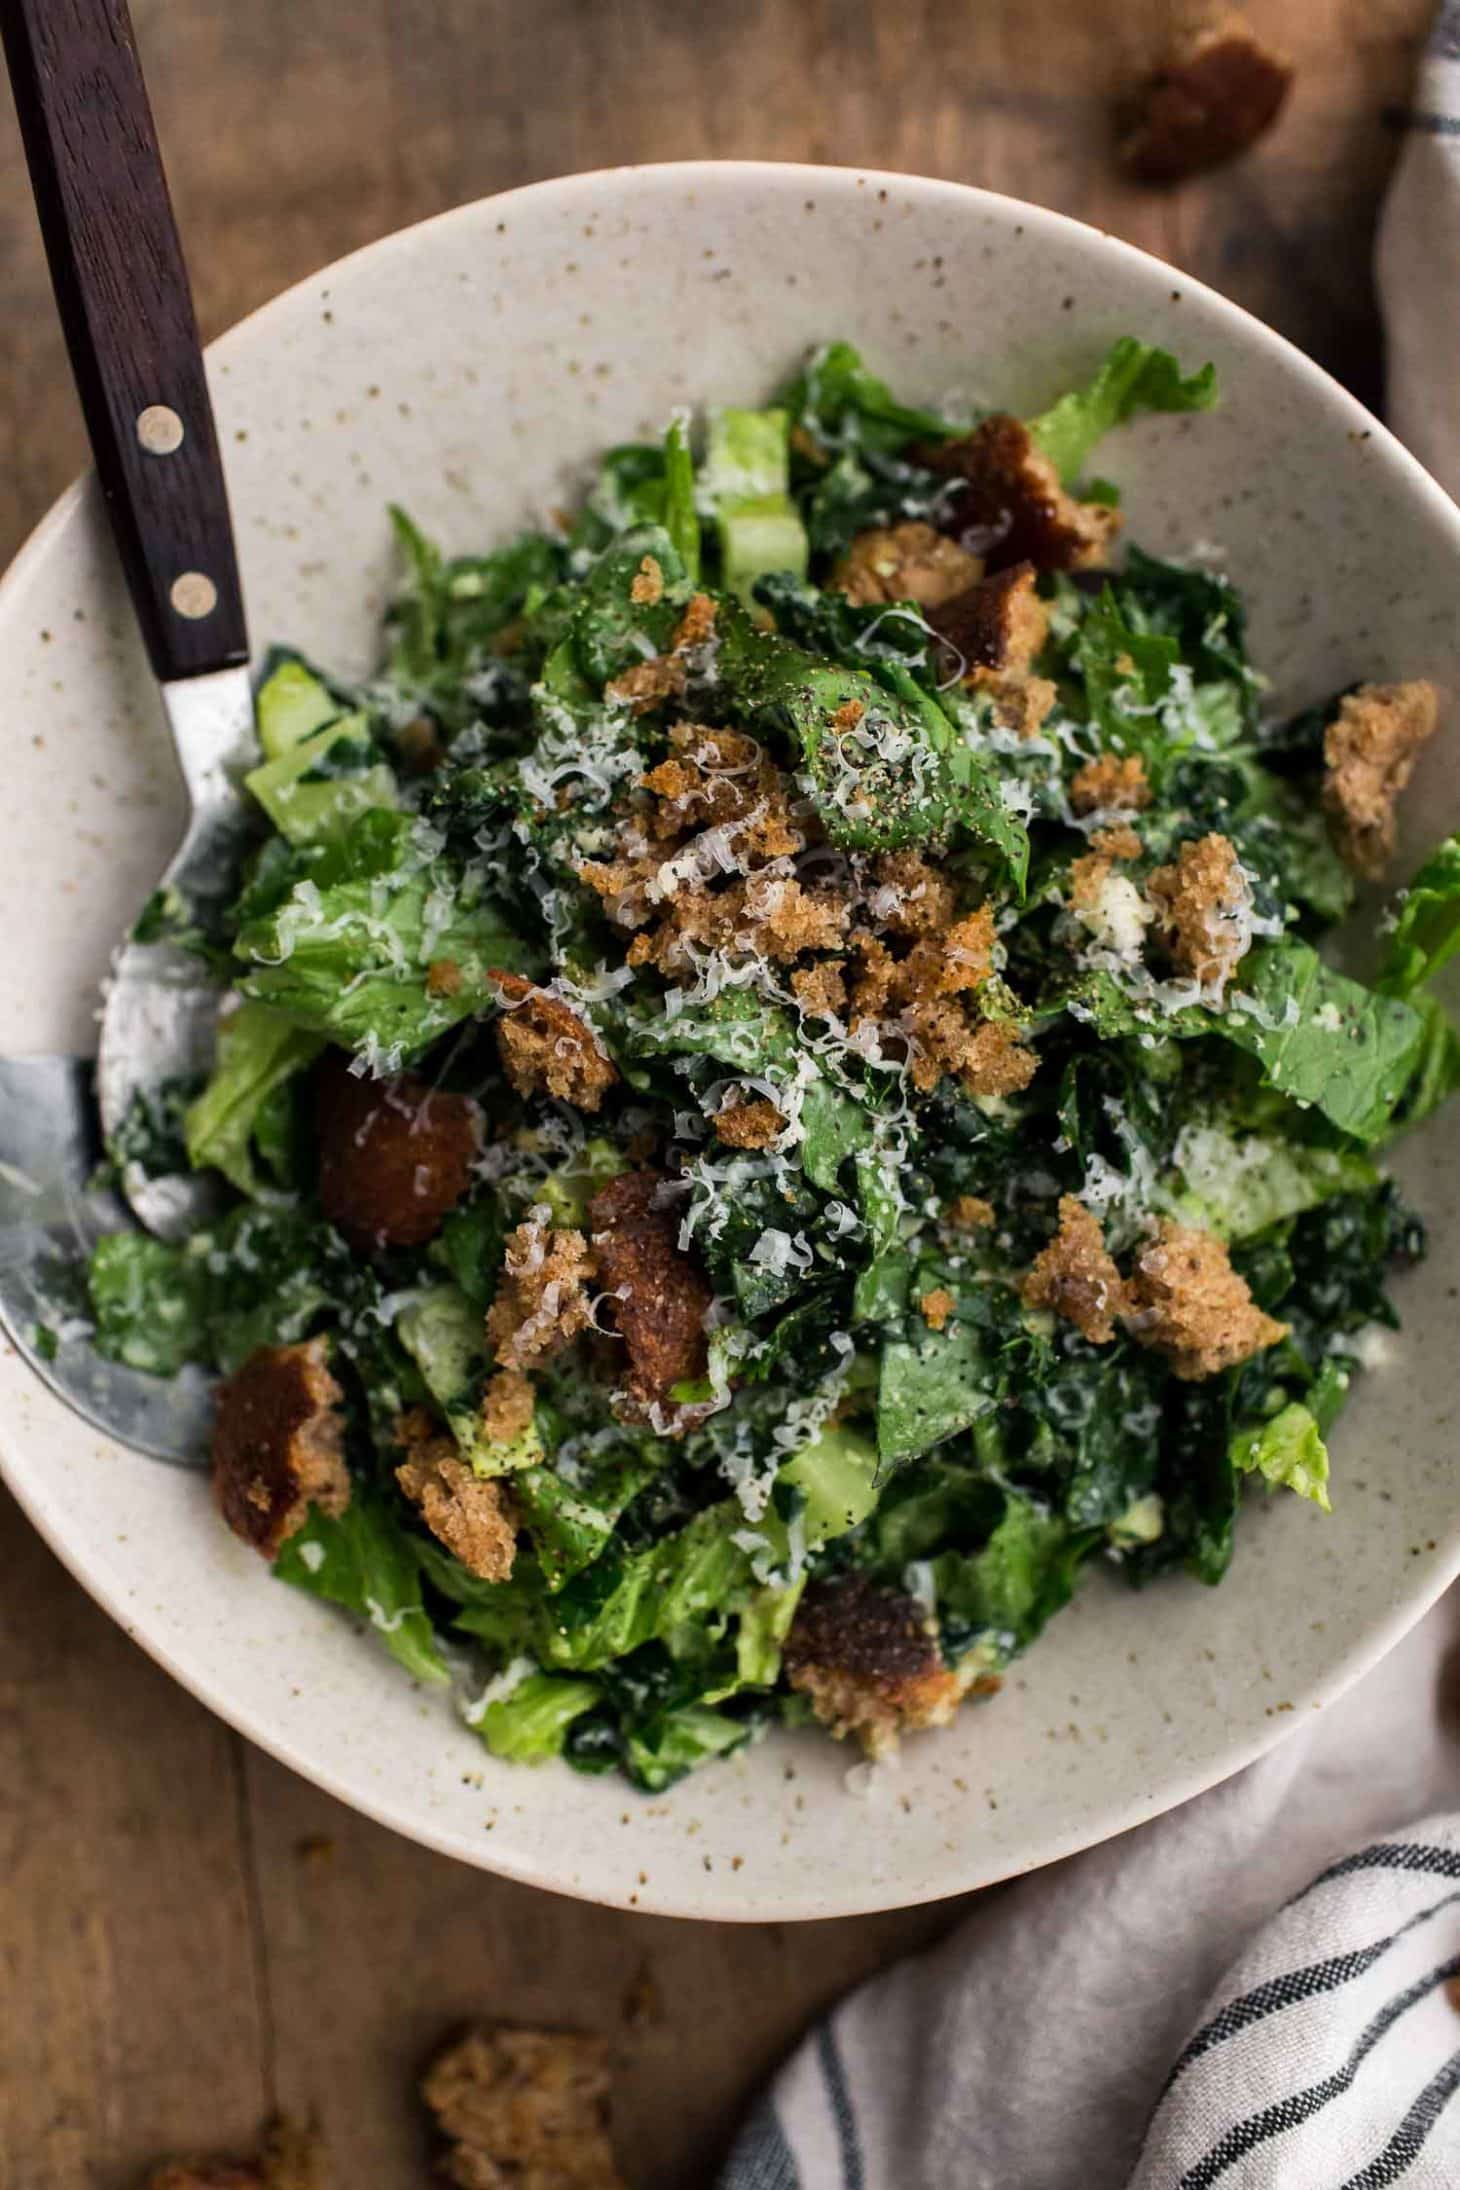 Tahini Kale Caesar Salad With Whole Grain Croutons Naturally,13 Cup In Ml